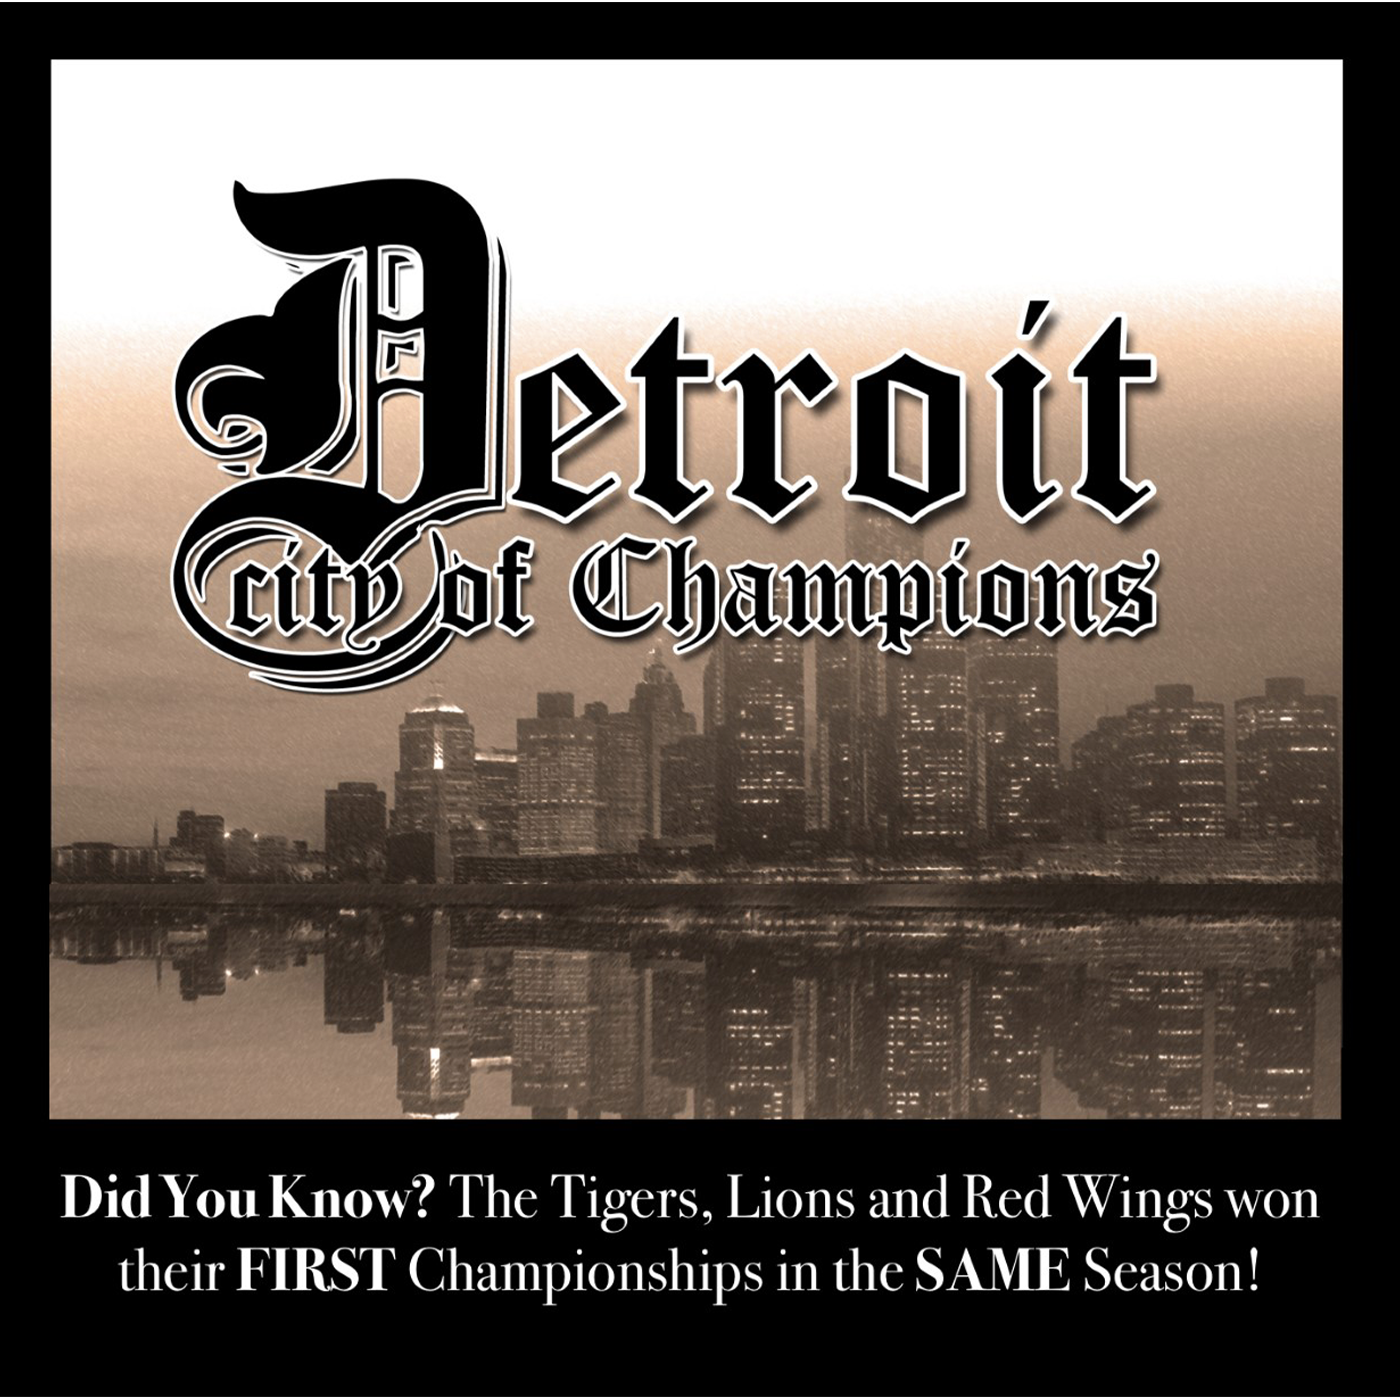 Detroit City of Champions –  Episode 8: “Play Ball!” – The Movie